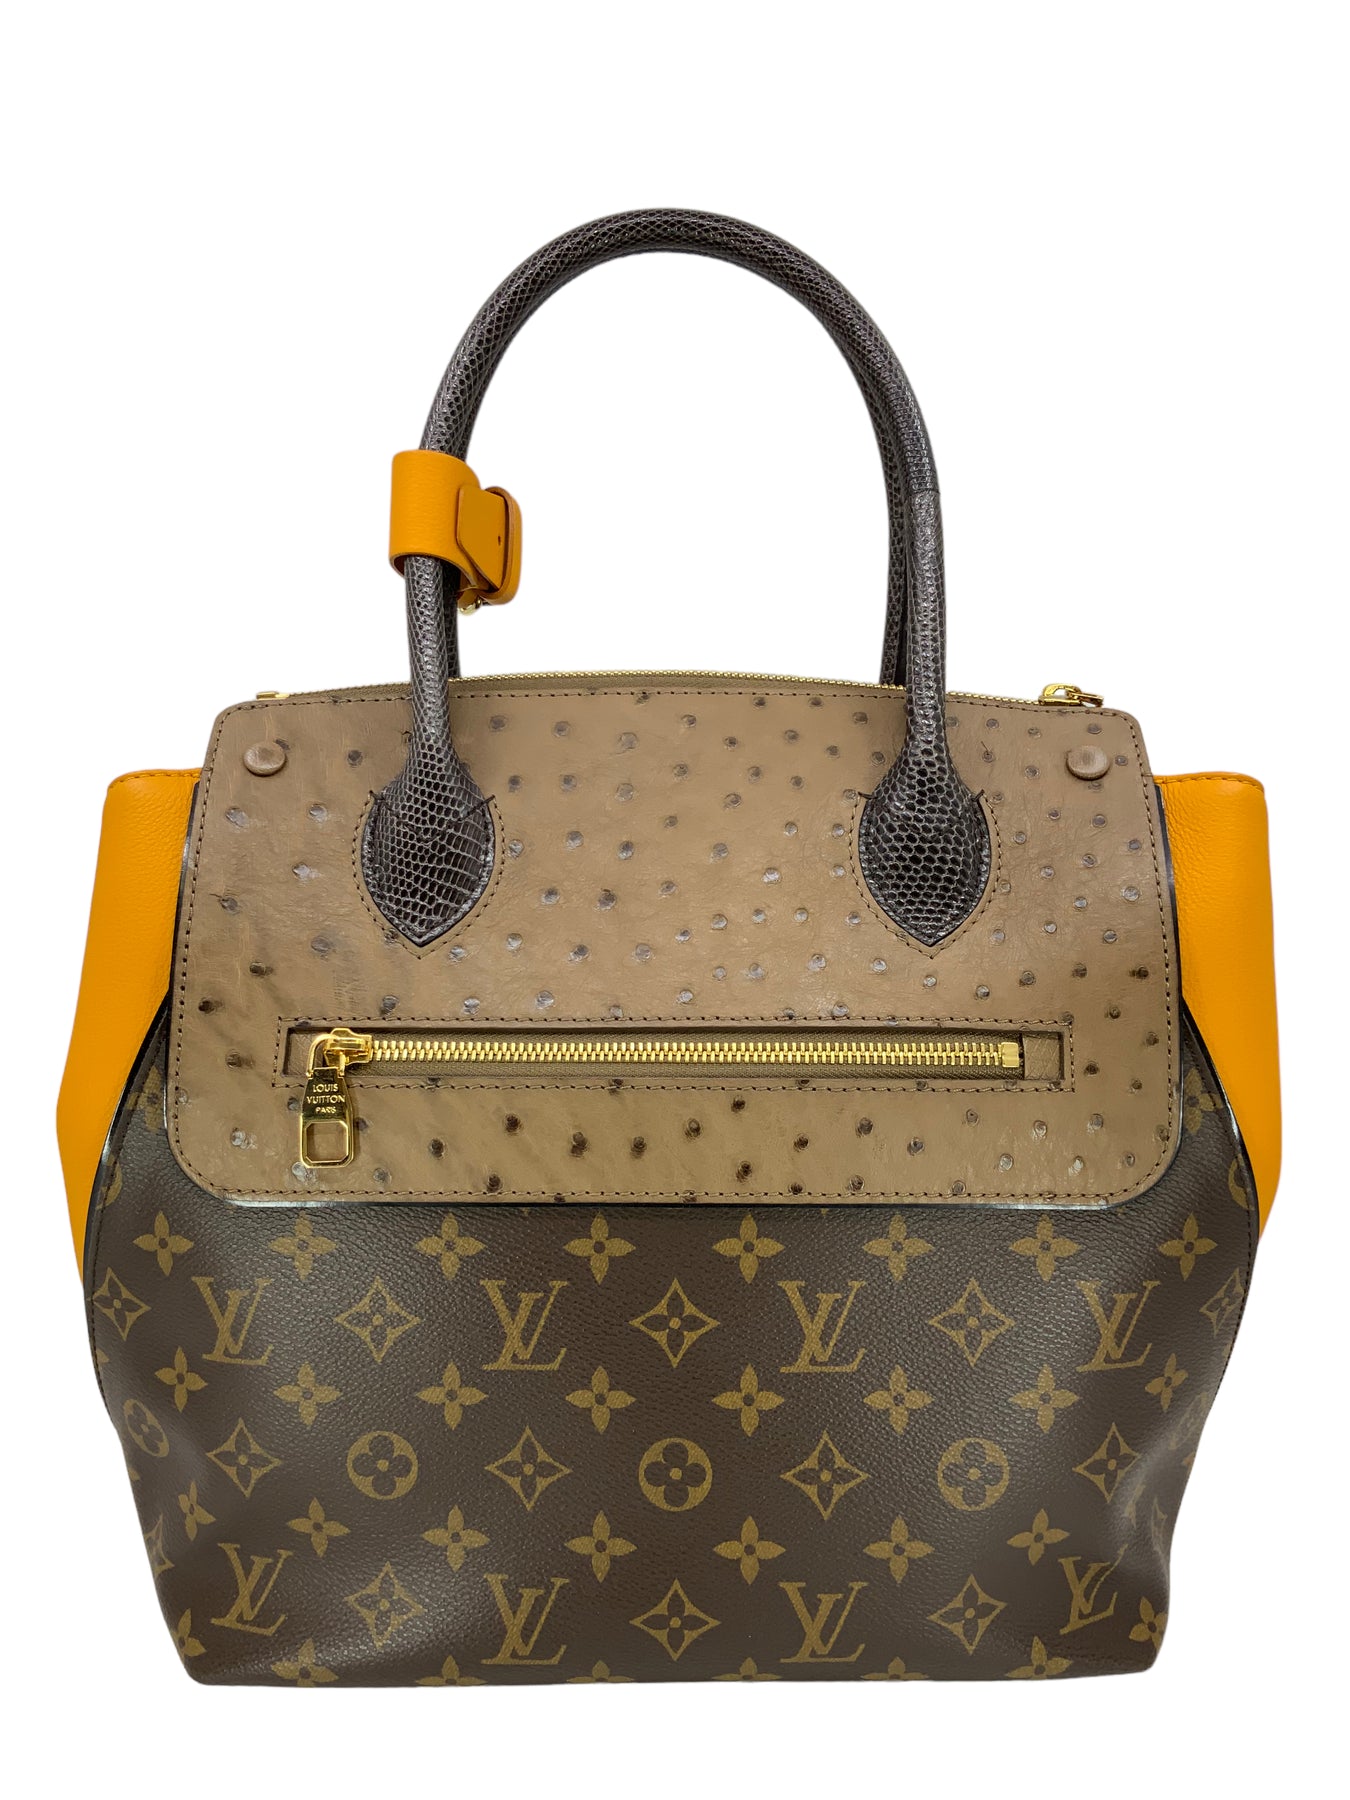 lv tote bag limited edition